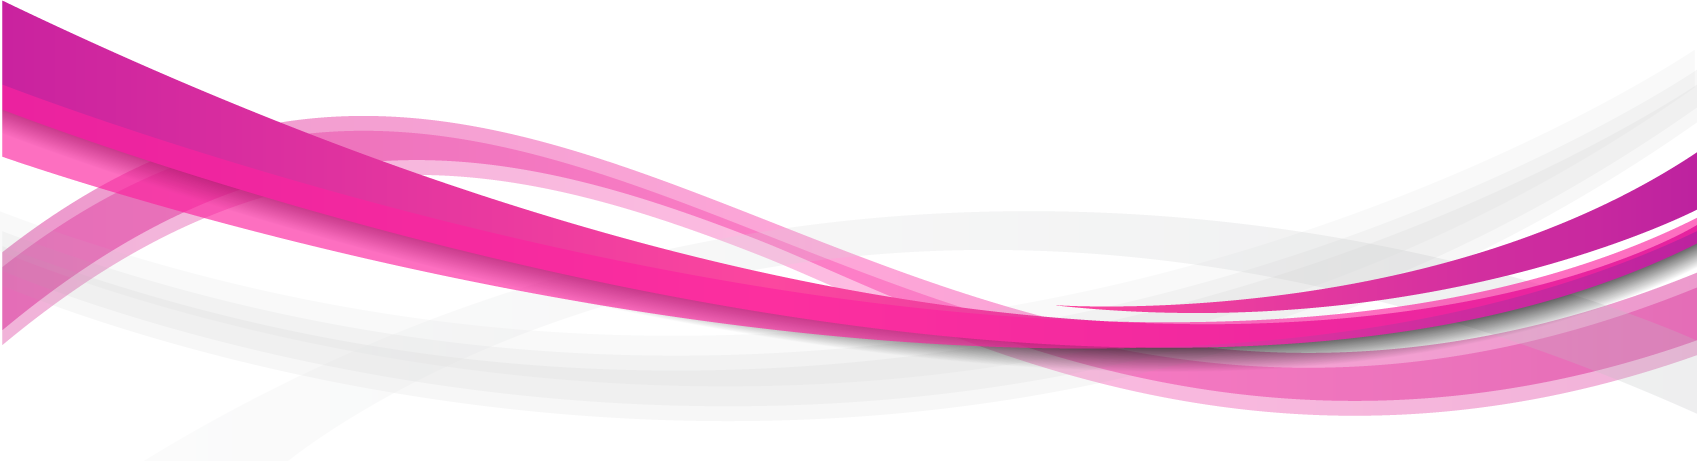 Linee astratte rosa Immagine PNG